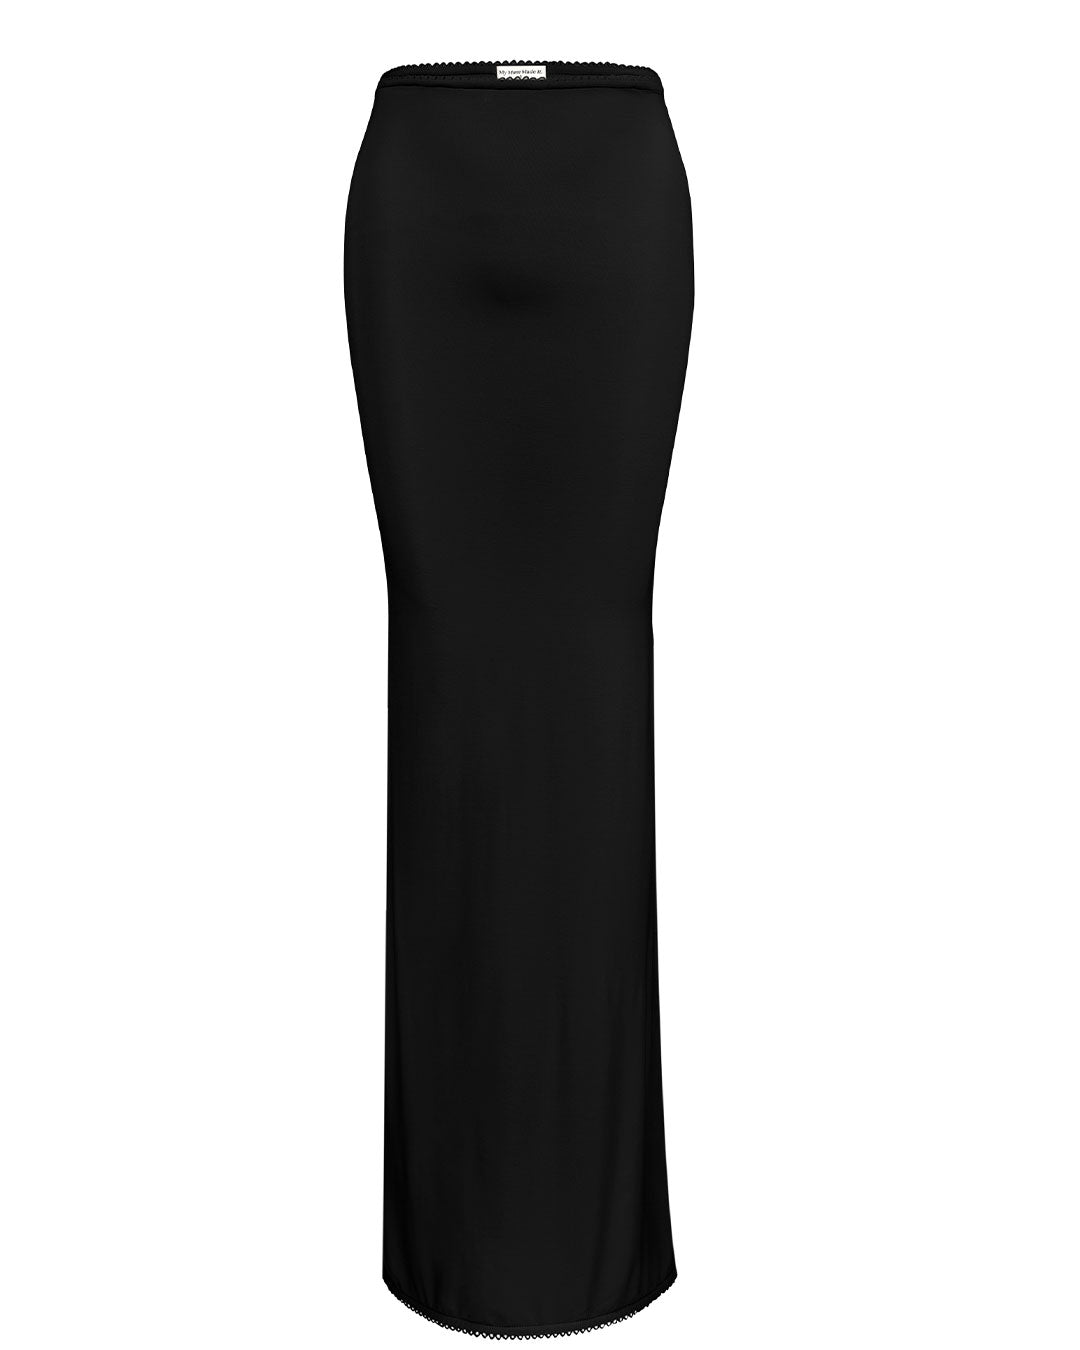 Bamboo Fitted Maxi Skirt - Black